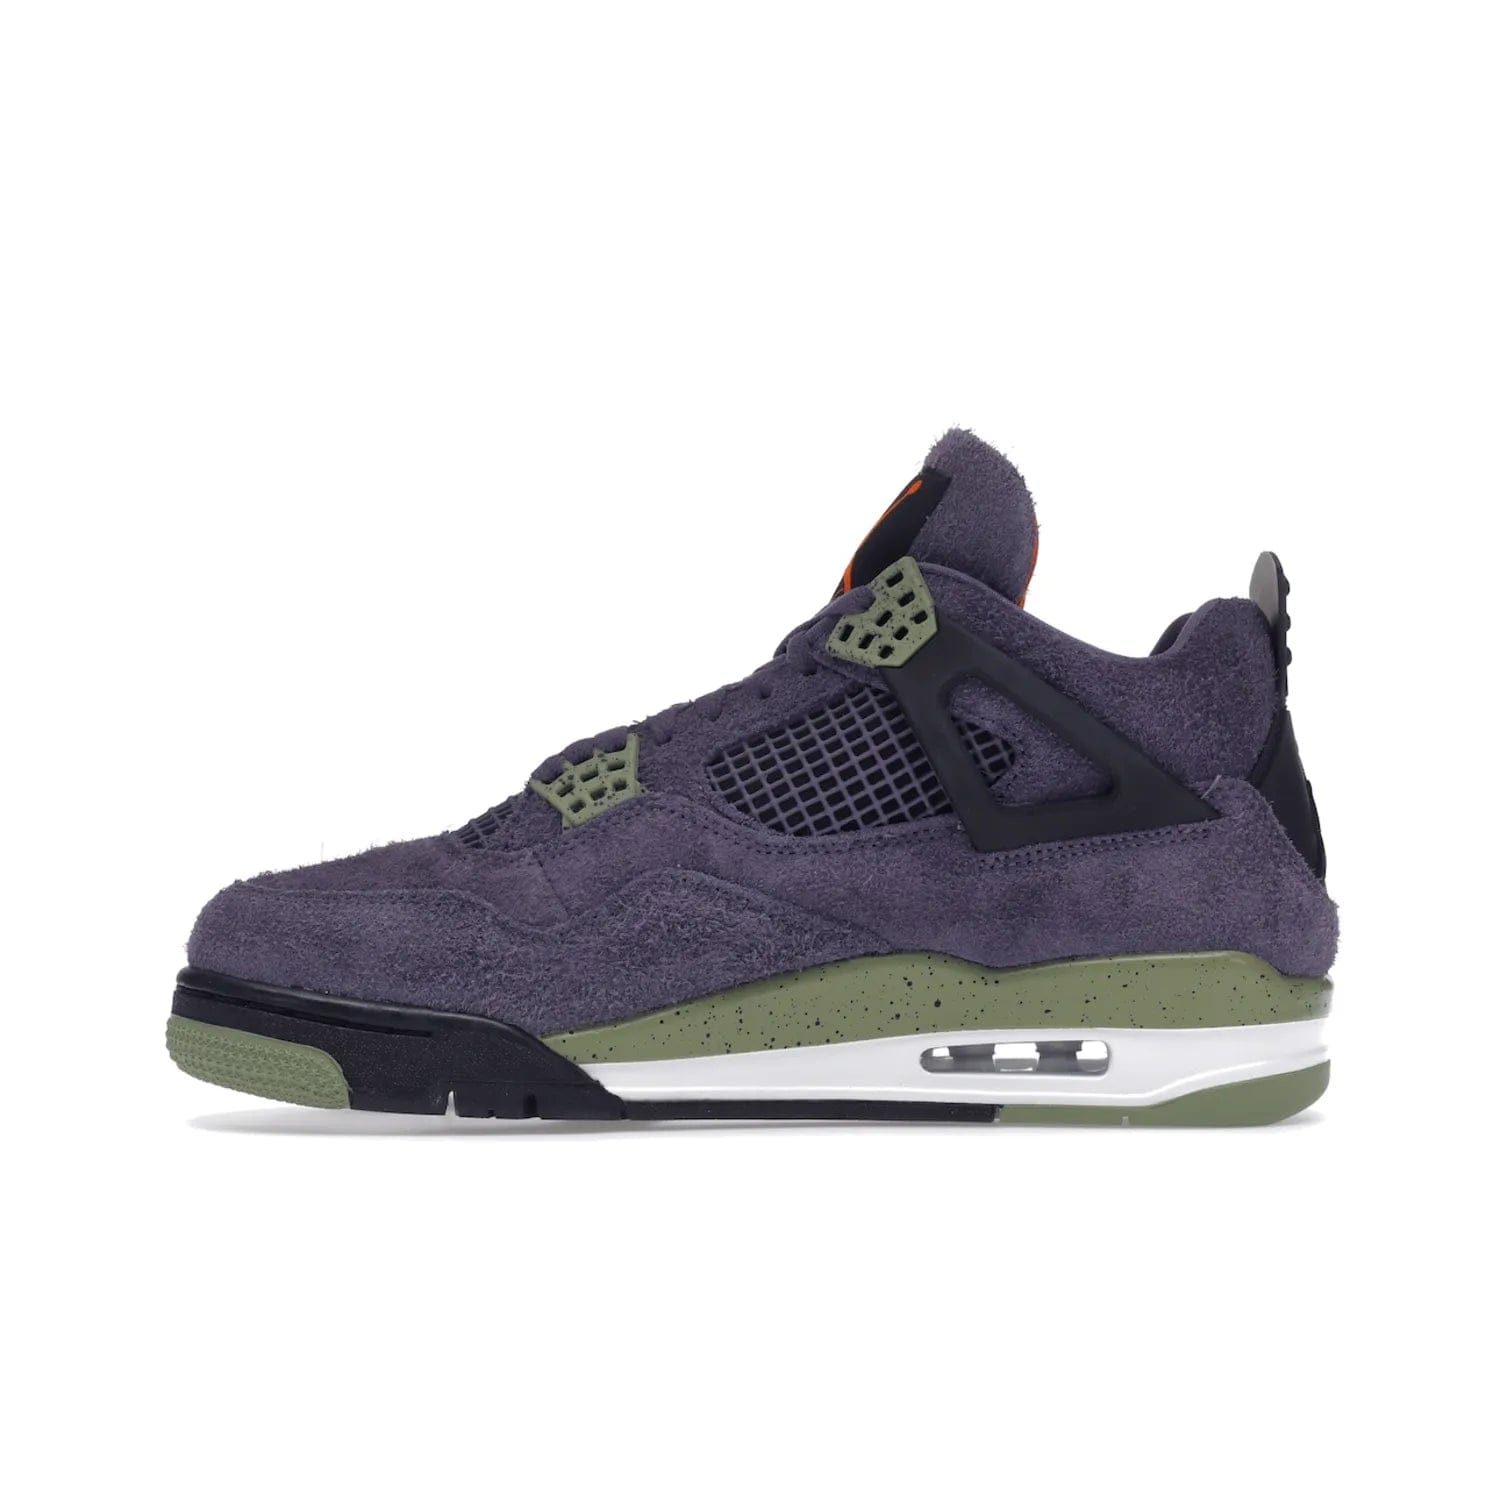 Jordan 4 Retro Canyon Purple (Women's) - Image 19 - Only at www.BallersClubKickz.com - New Air Jordan 4 Retro Canyon Purple W sneaker features shaggy purple suede, lime highlights & safety orange Jumpman branding. Classic ankle-hugging silhouette with modern colors released 15/10/2022.